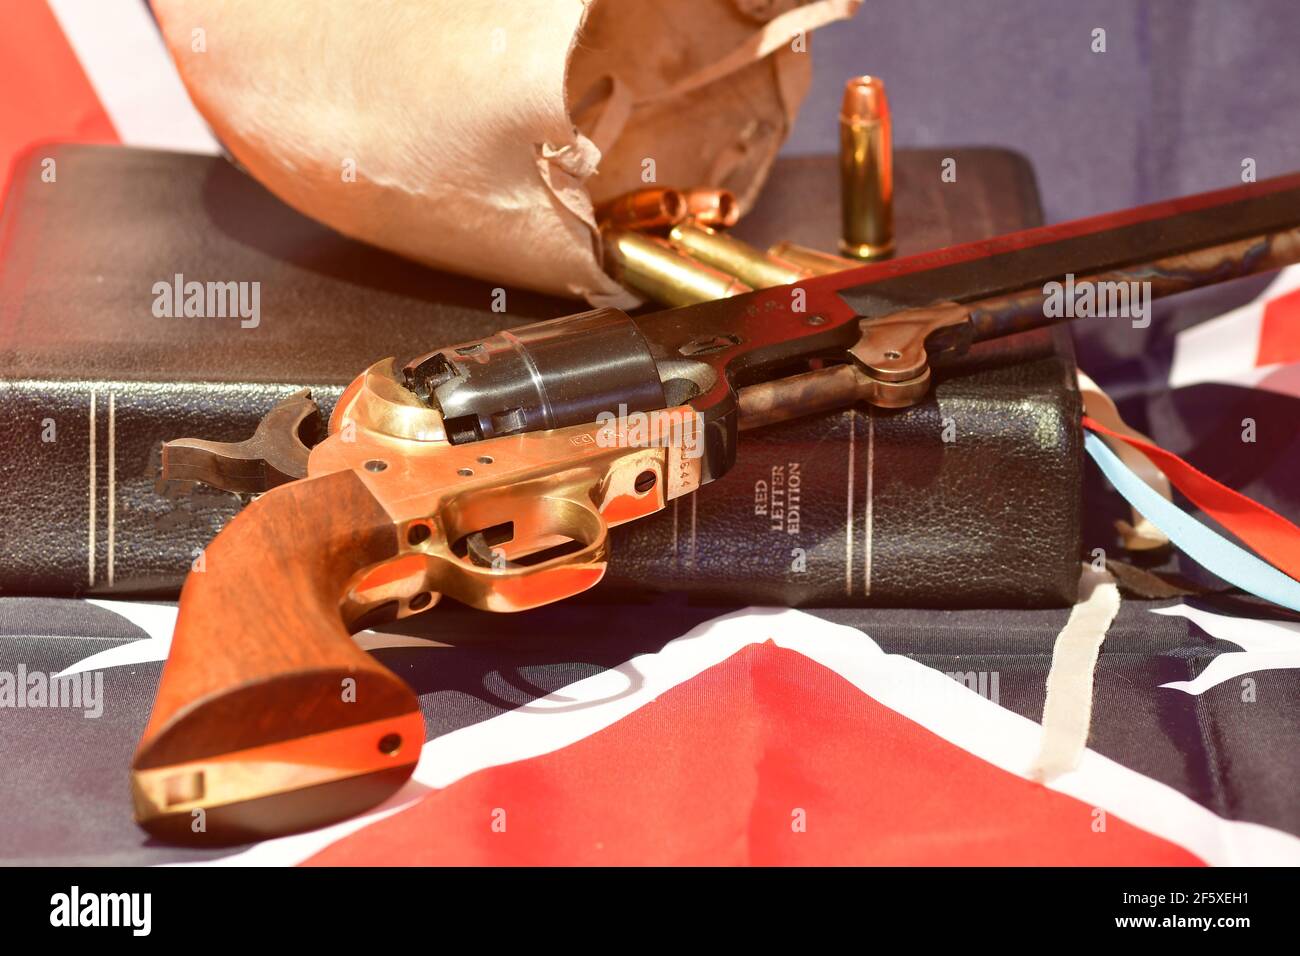 The Holy Bible, bull scrotum, bullets, and revolver on the rebel flag Stock Photo